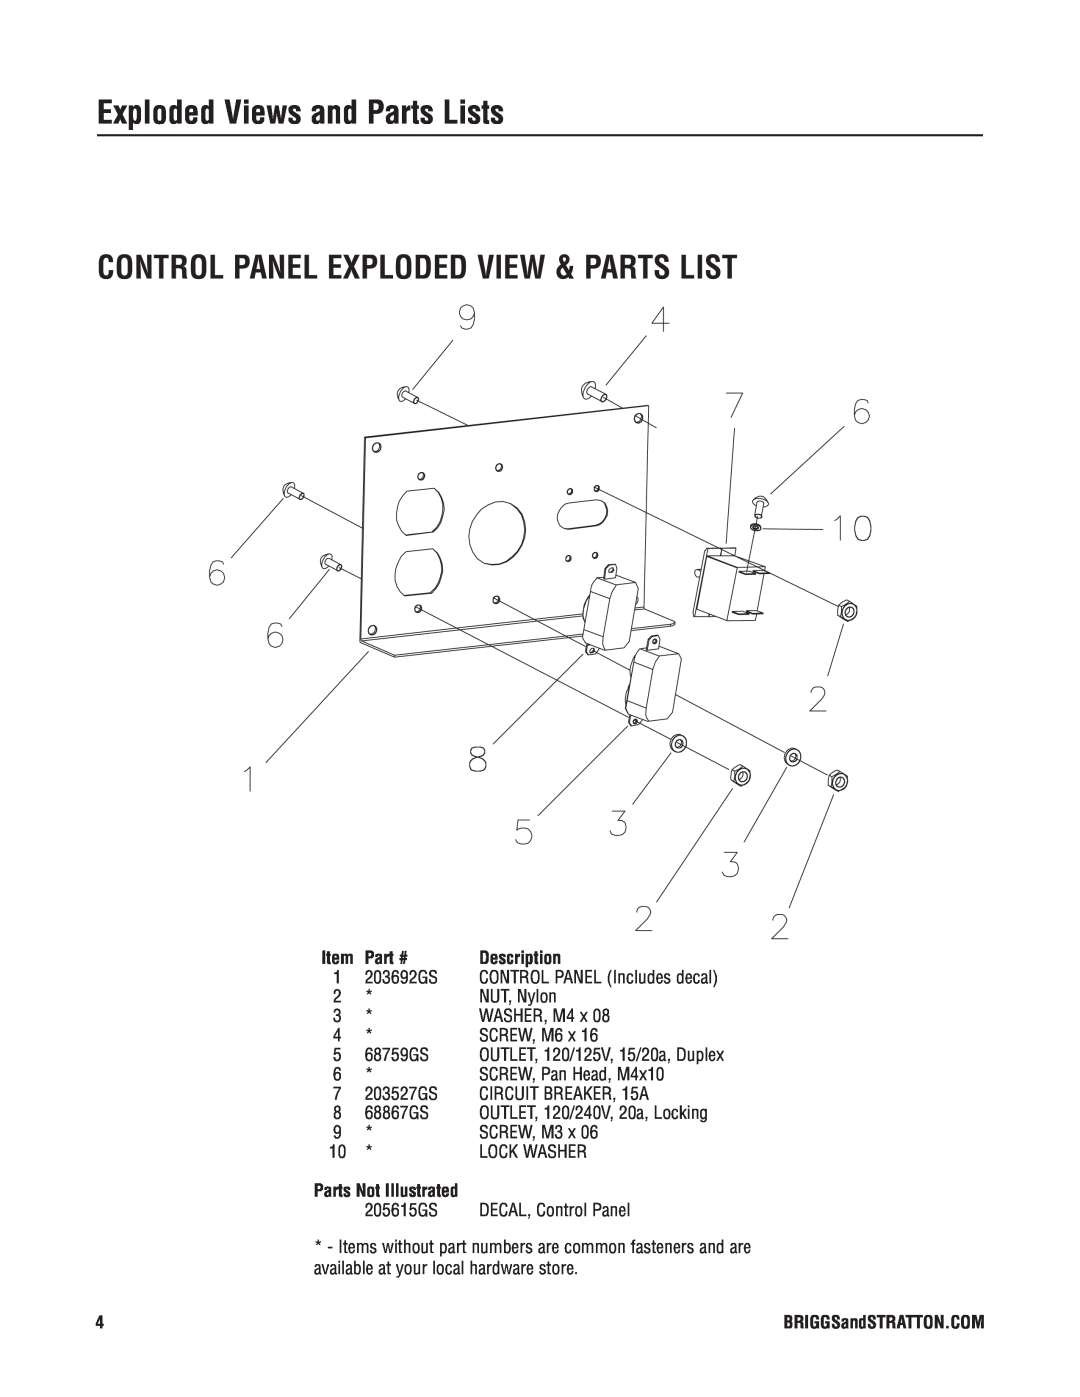 Briggs & Stratton 30372 manual Control Panel Exploded View & Parts List, Item Part #, Exploded Views and Parts Lists 